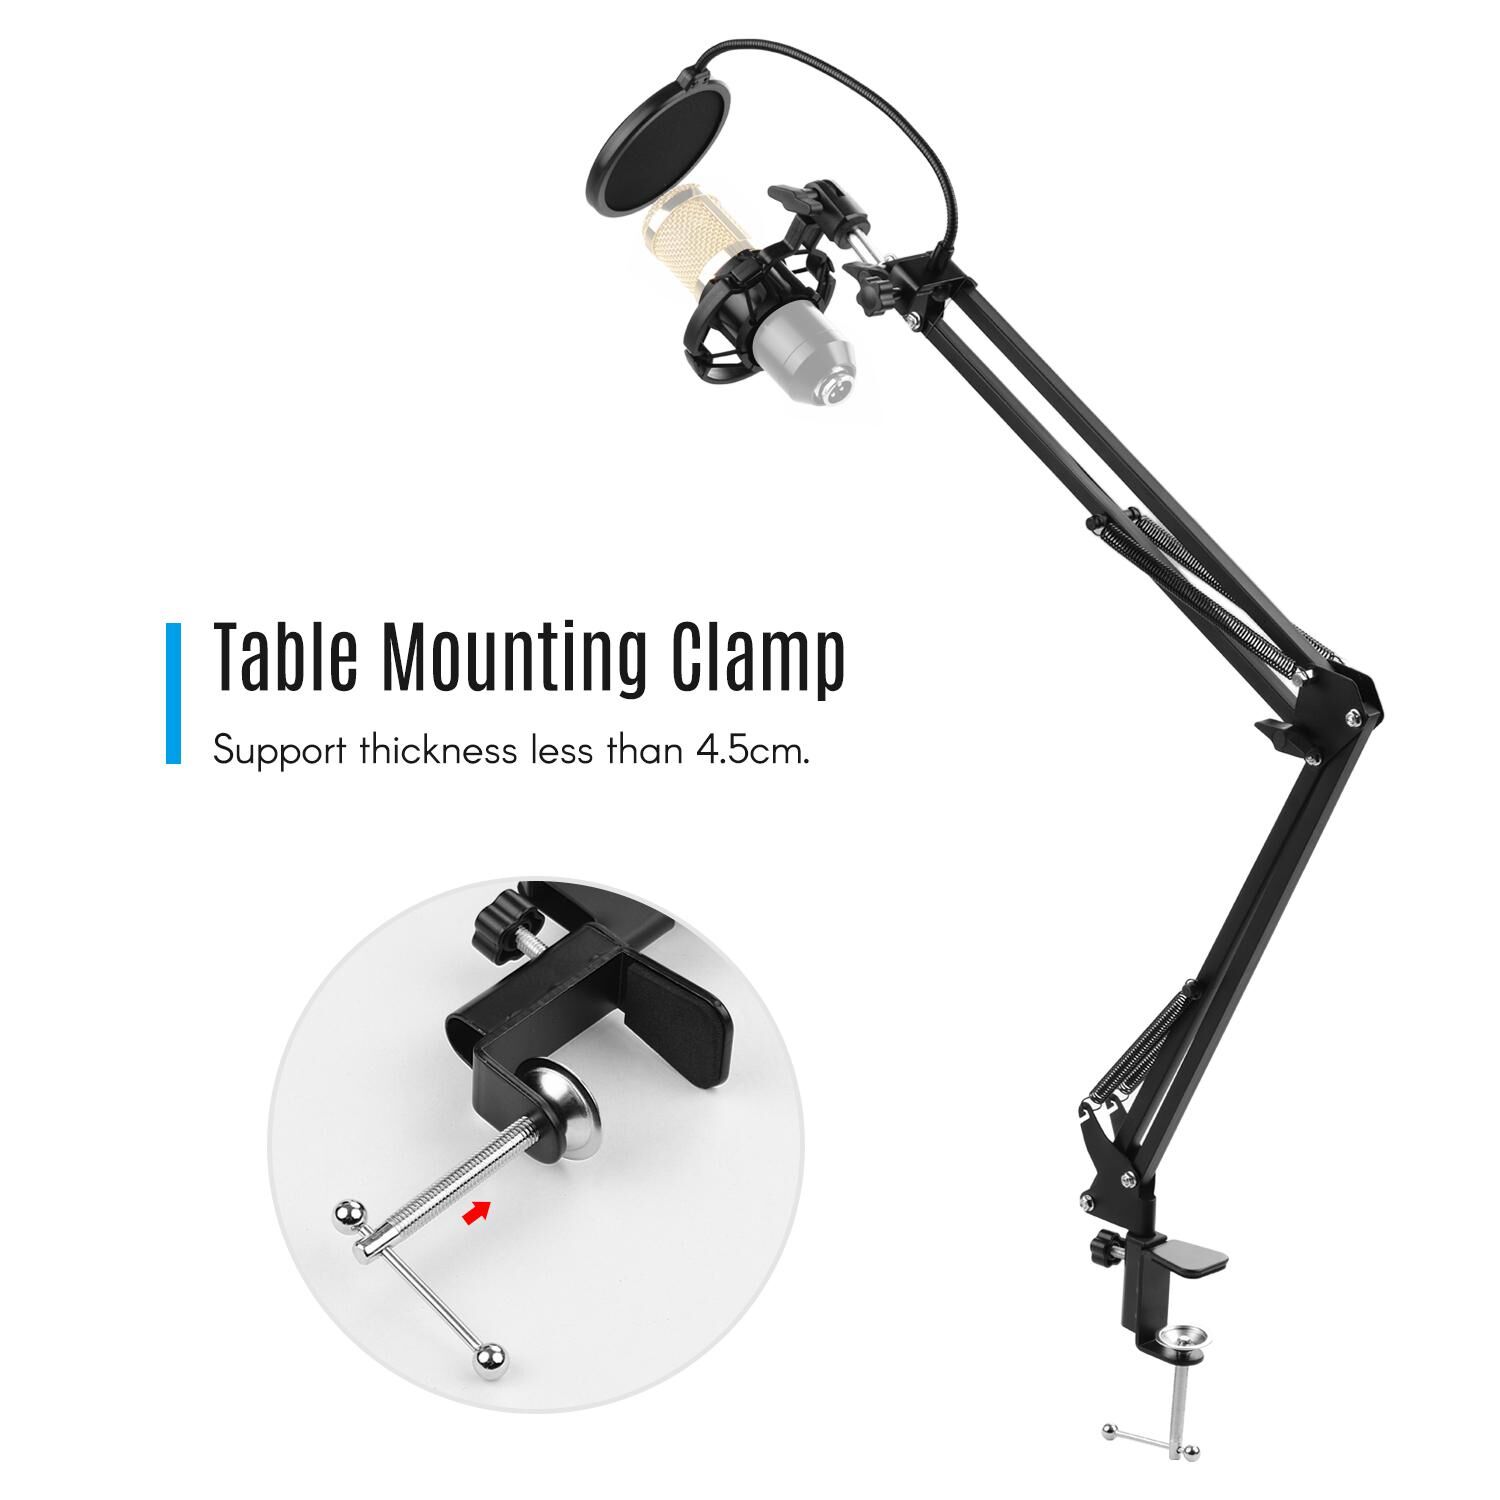 TOMTOP JMS Adjustable Foldable Microphone Stand Heaby Duty Metal Mic Arm Bracket with Shock Proof Holder